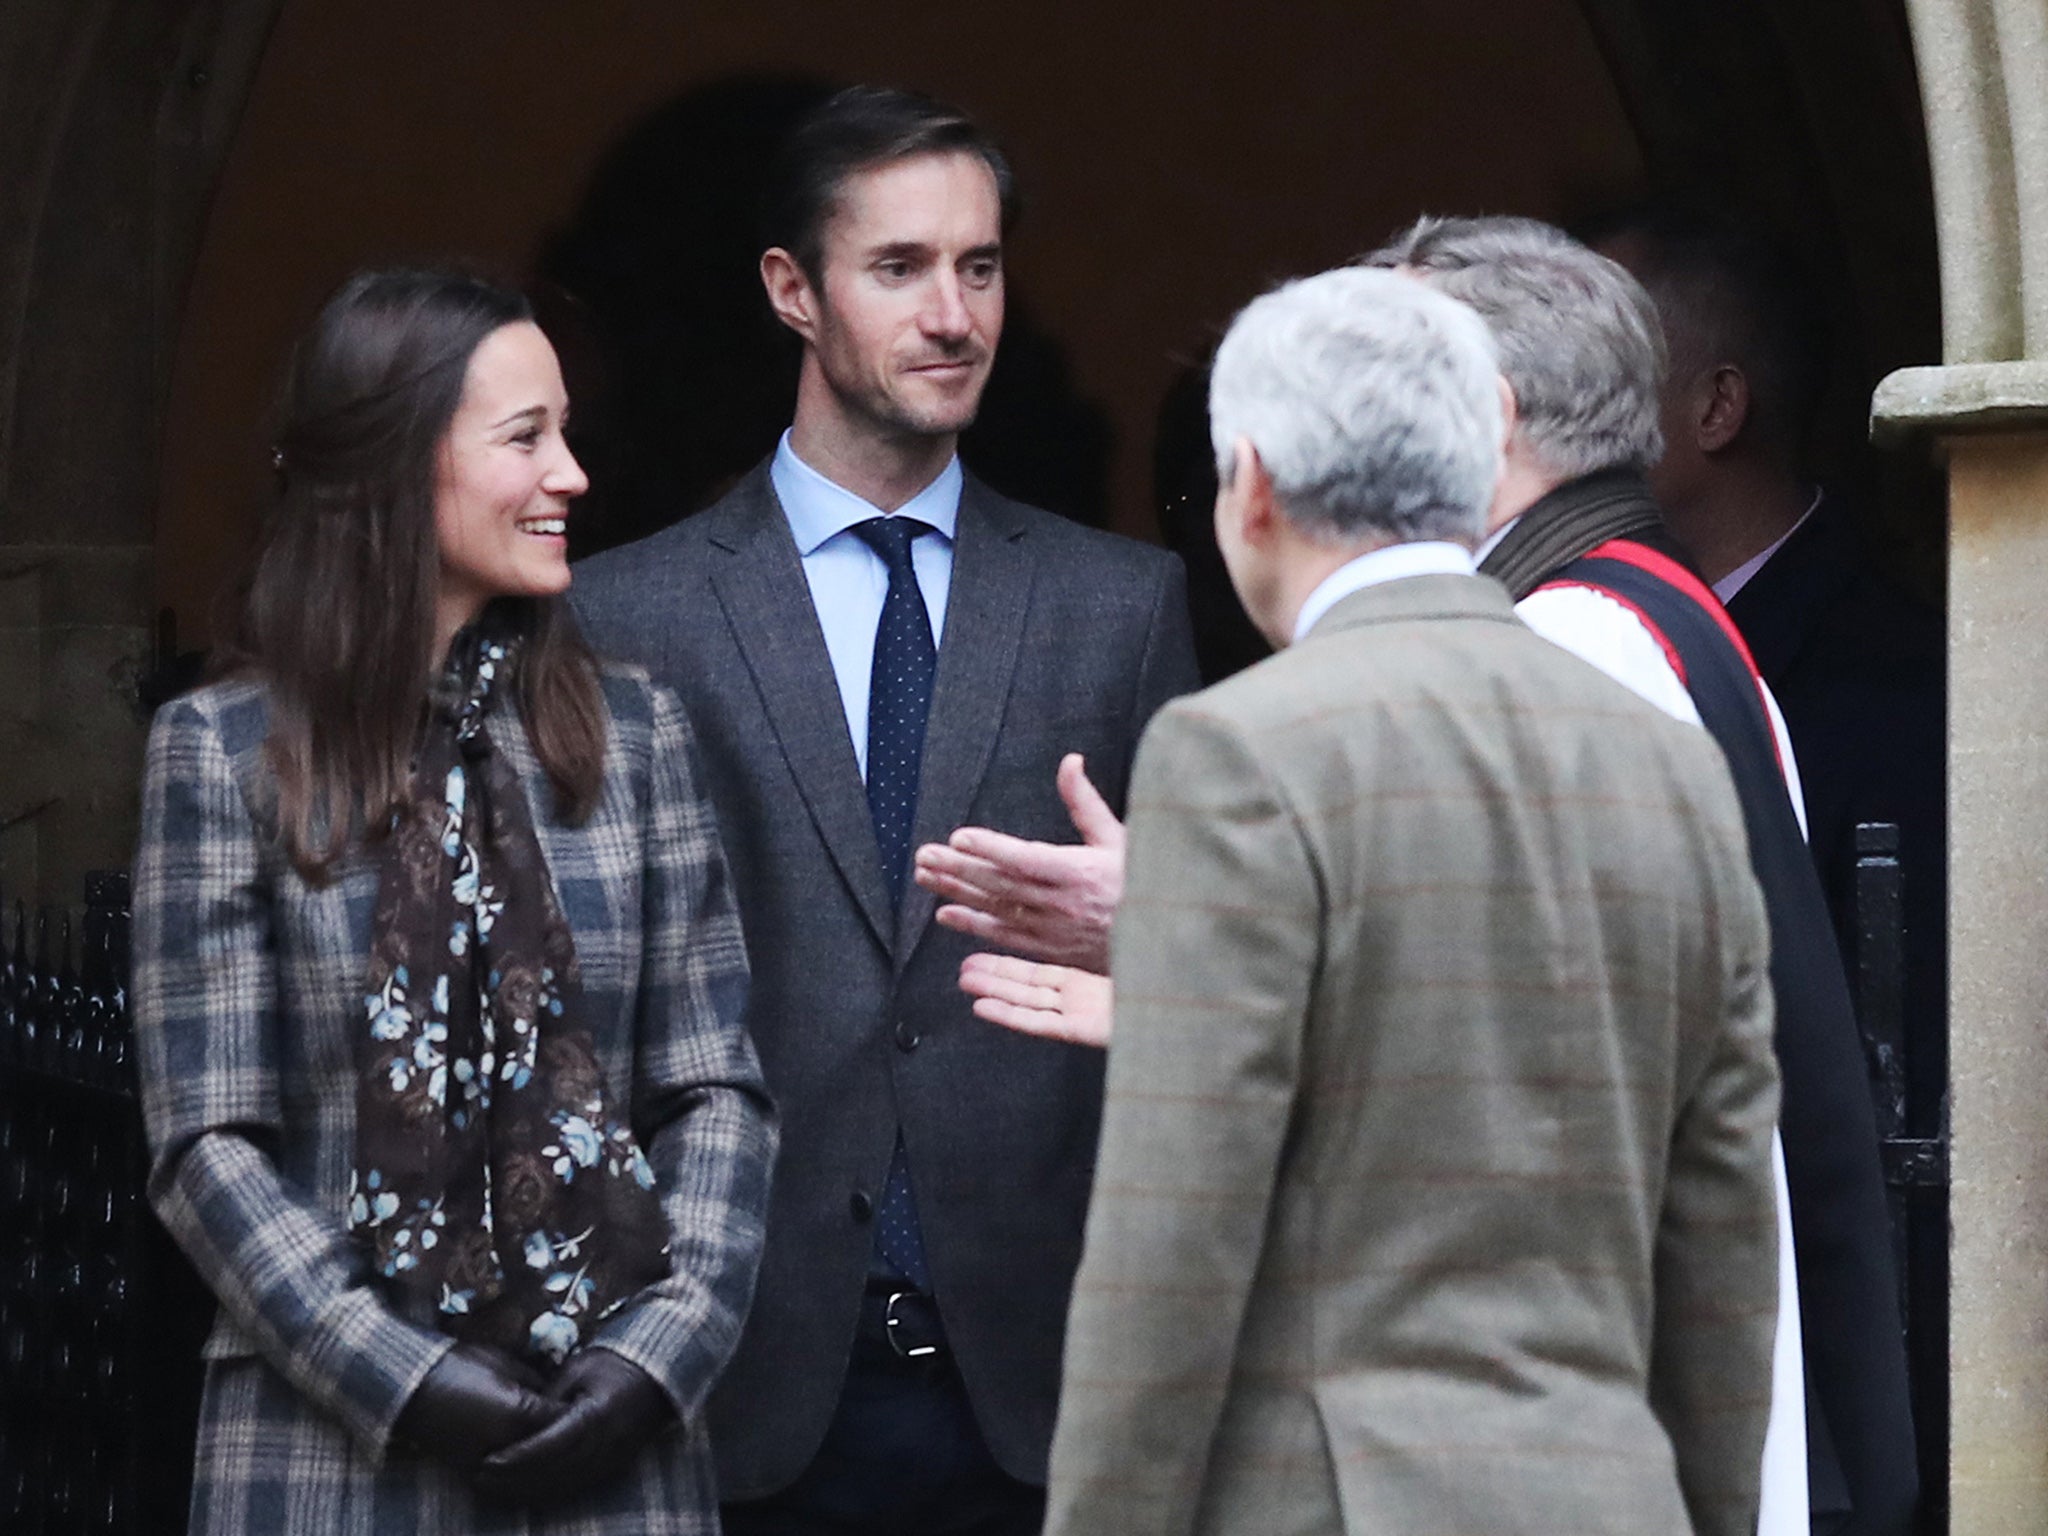 Pippa Middleton is set to marry James Matthews over the weekend in a lavish ceremony